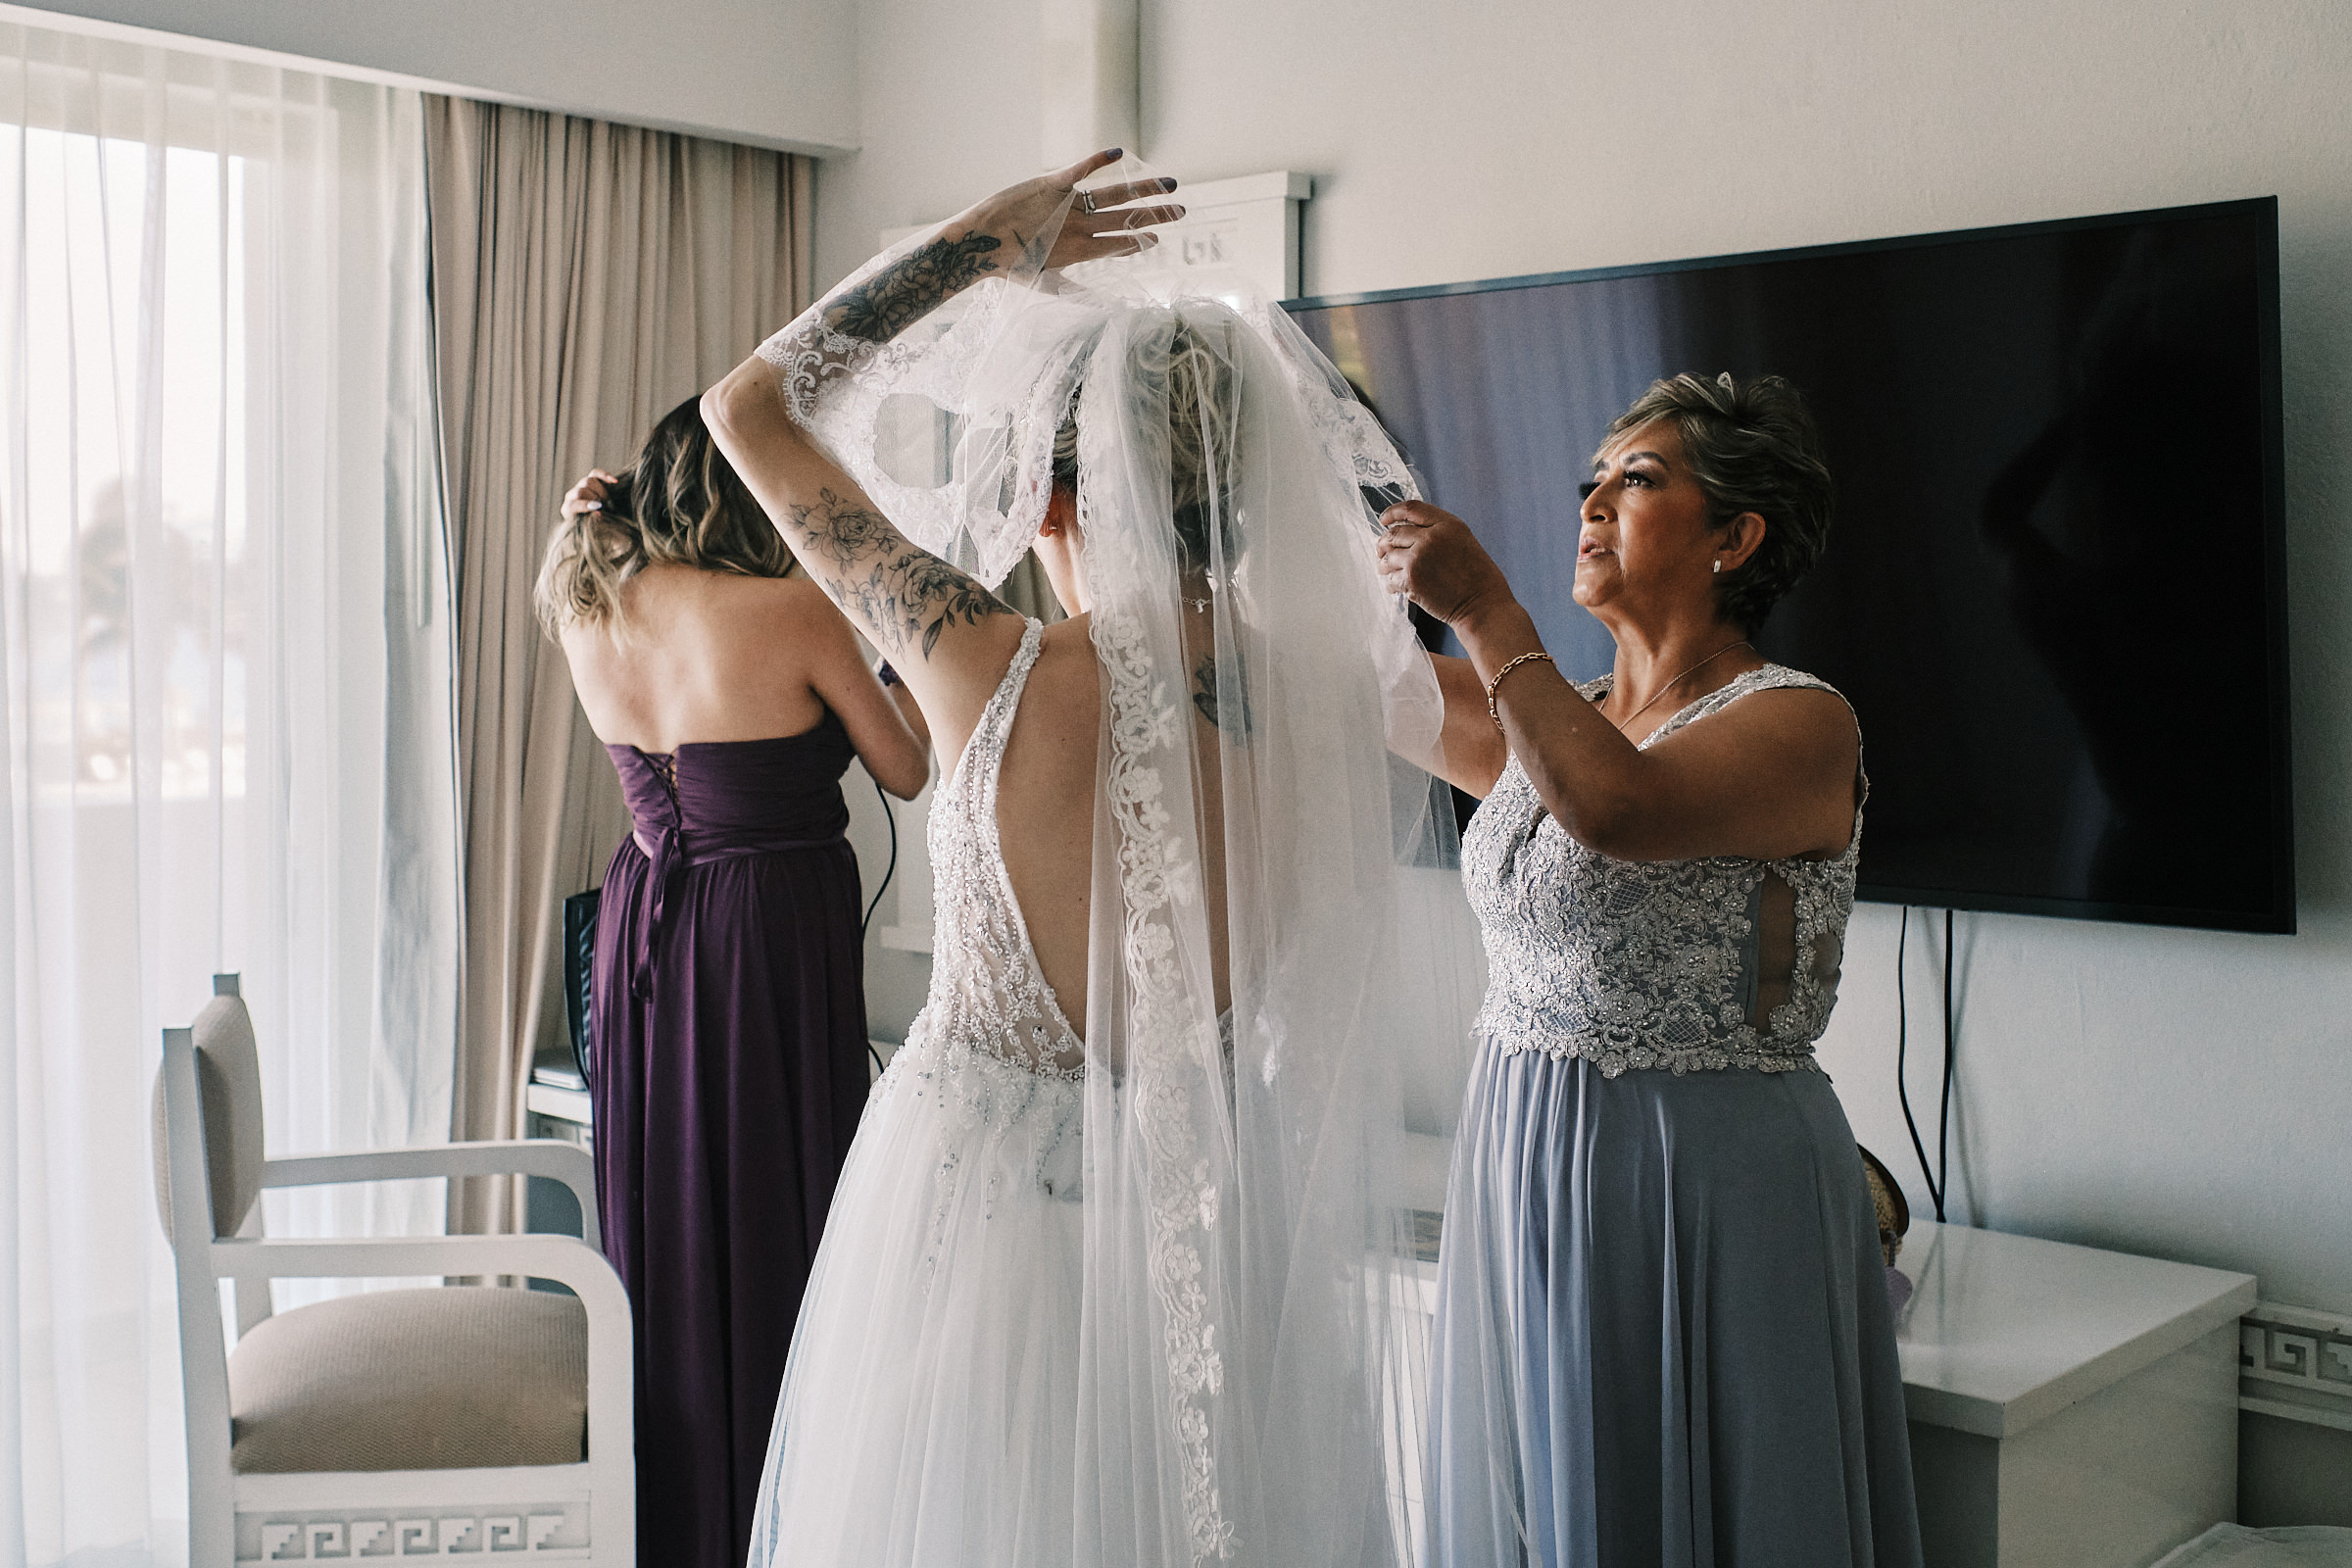 Bride In Her Hotel Room Gets Ready For Her Destination Wedding Ceremony